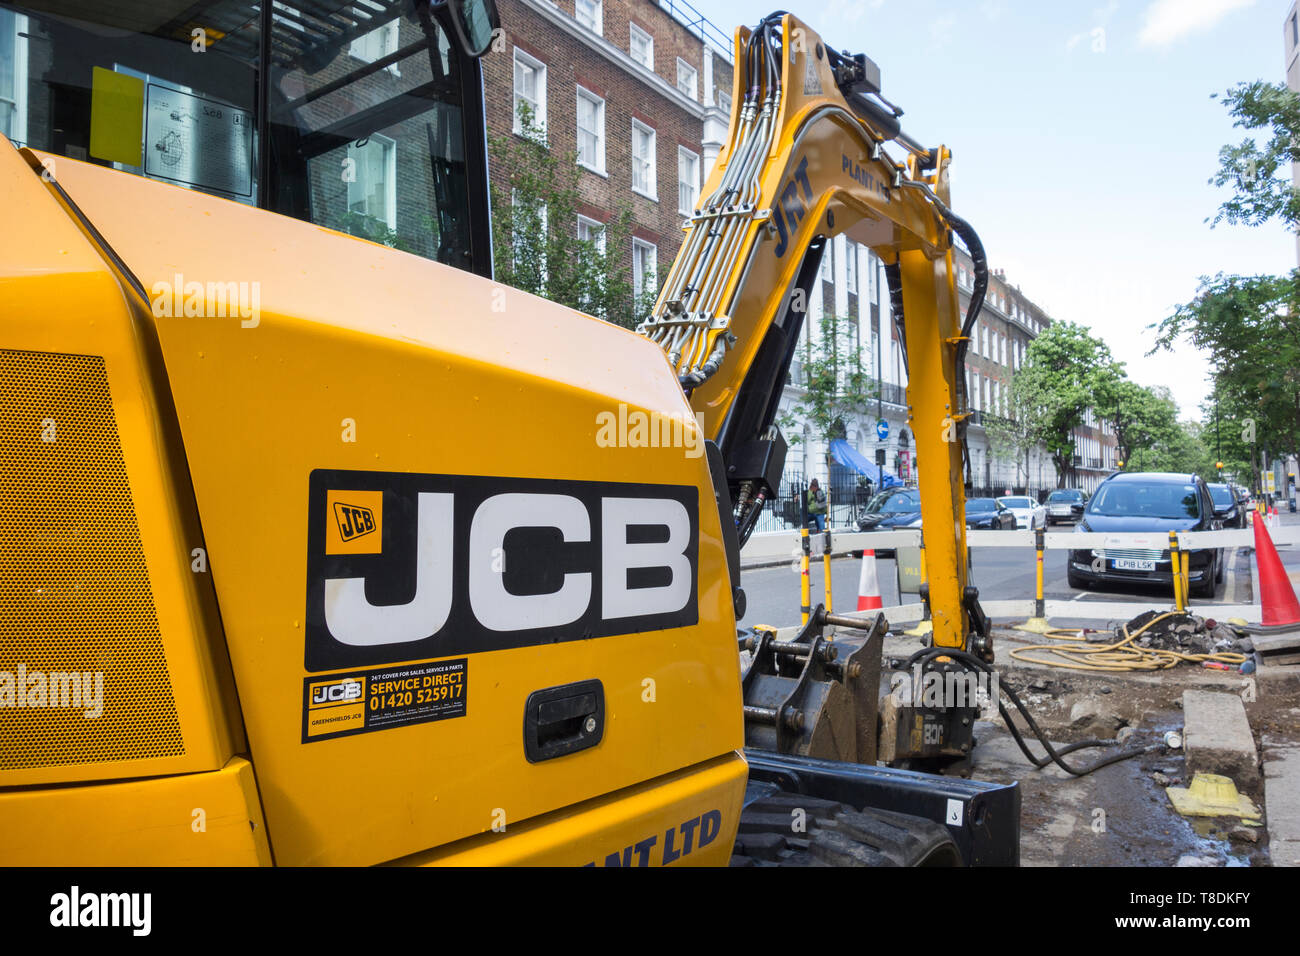 Roadworks and a JCB Digger on a street in London Stock Photo